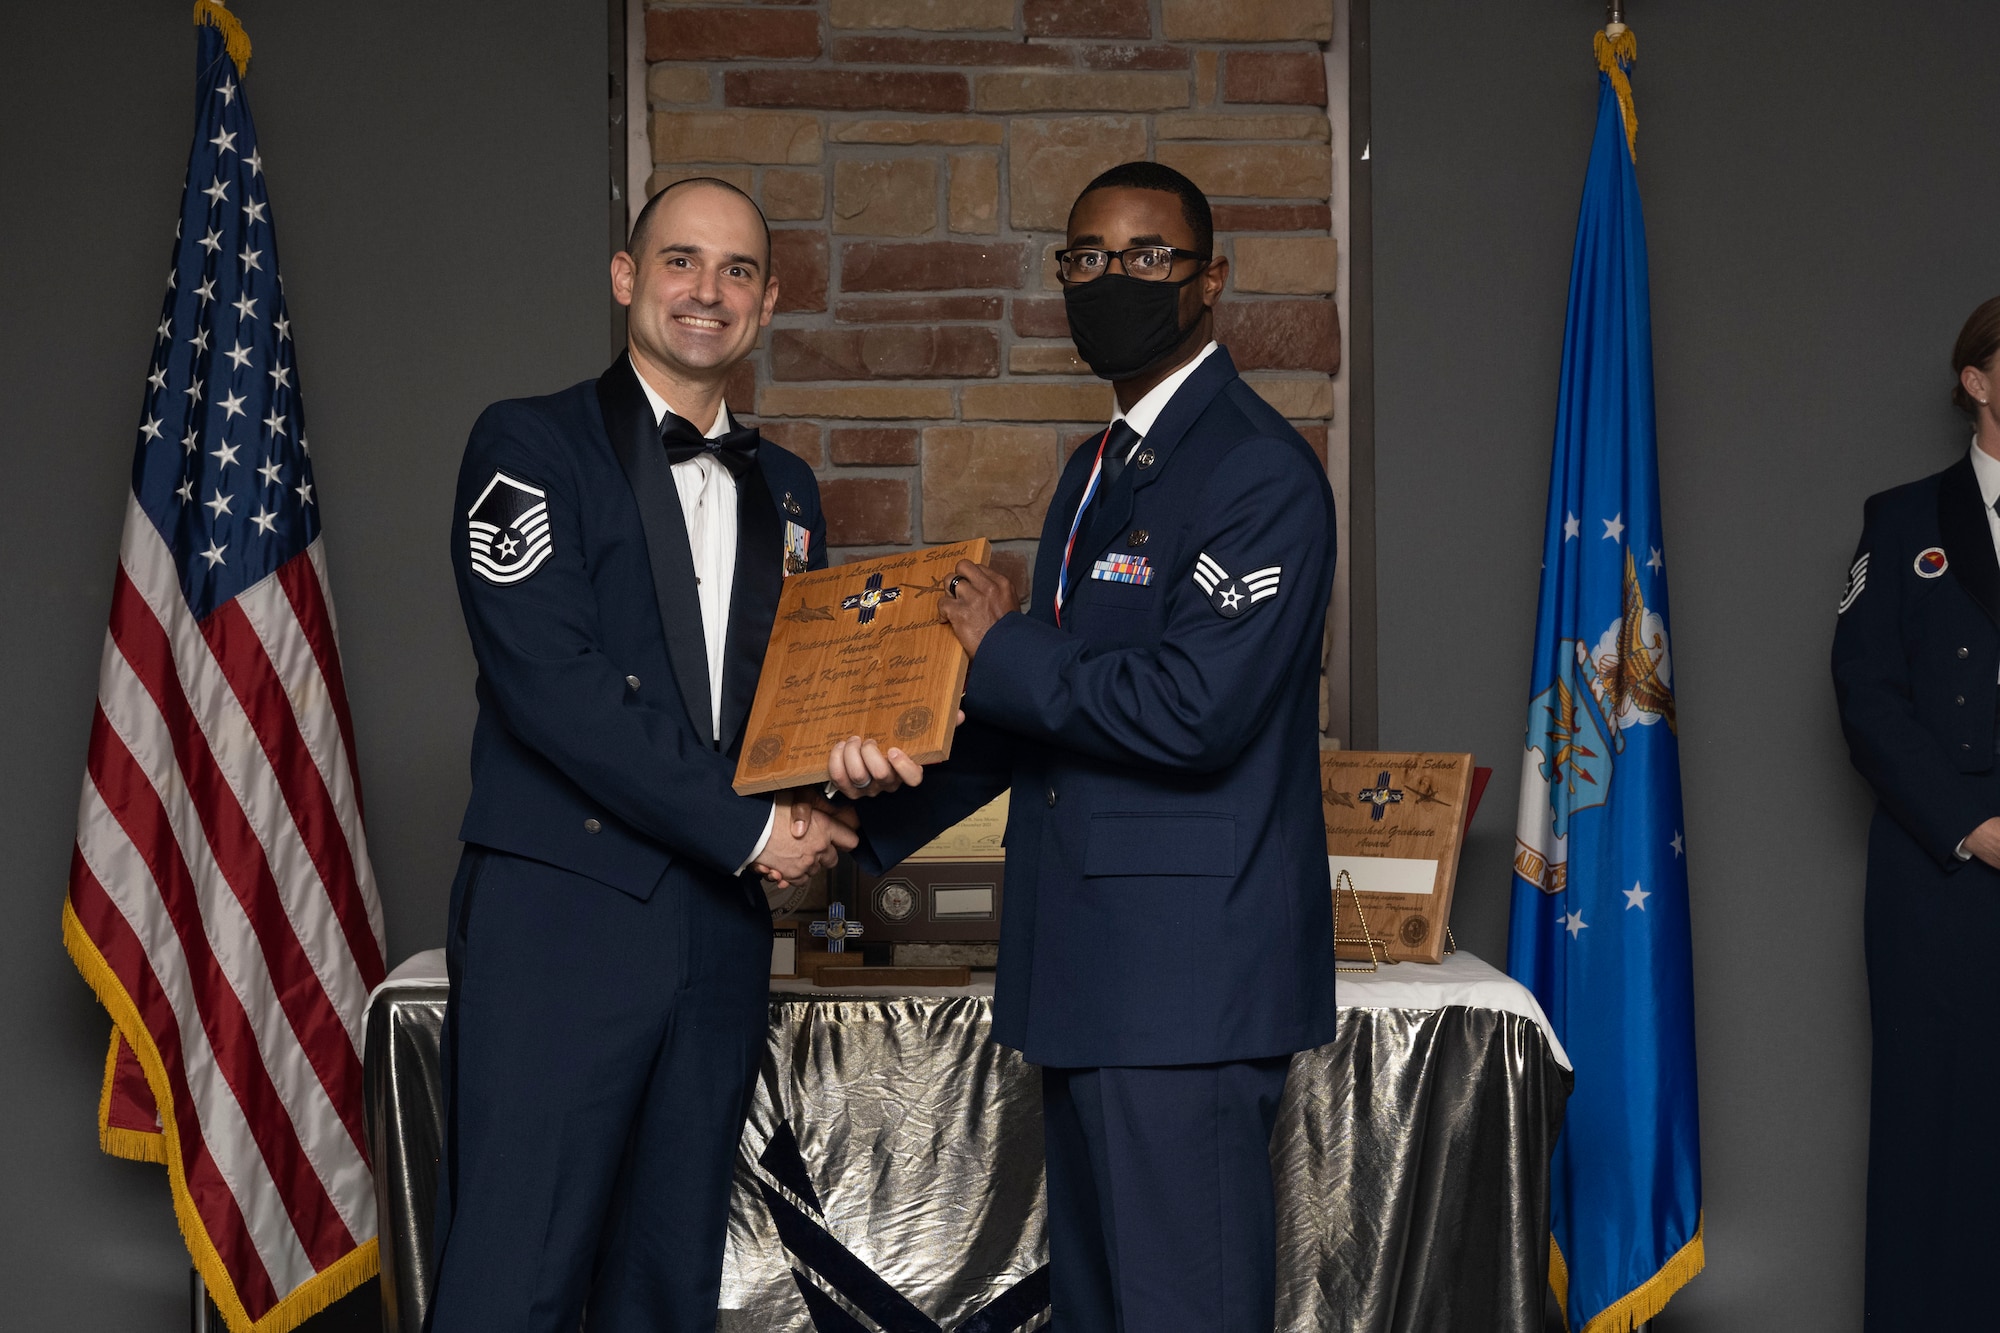 Senior Airman Kyron J. Hines, Airman Leadership School graduate, accepts the distinguished graduate award during the graduation of ALS class 22-2, Dec. 9, 2021, on Holloman Air Force Base, New Mexico. The distinguished graduate award is presented to the top ten-percent of graduates for their performance in academic evaluations and demonstration of leadership. (U.S. Air Force photo by Senior Airman Kristin Weathersby)